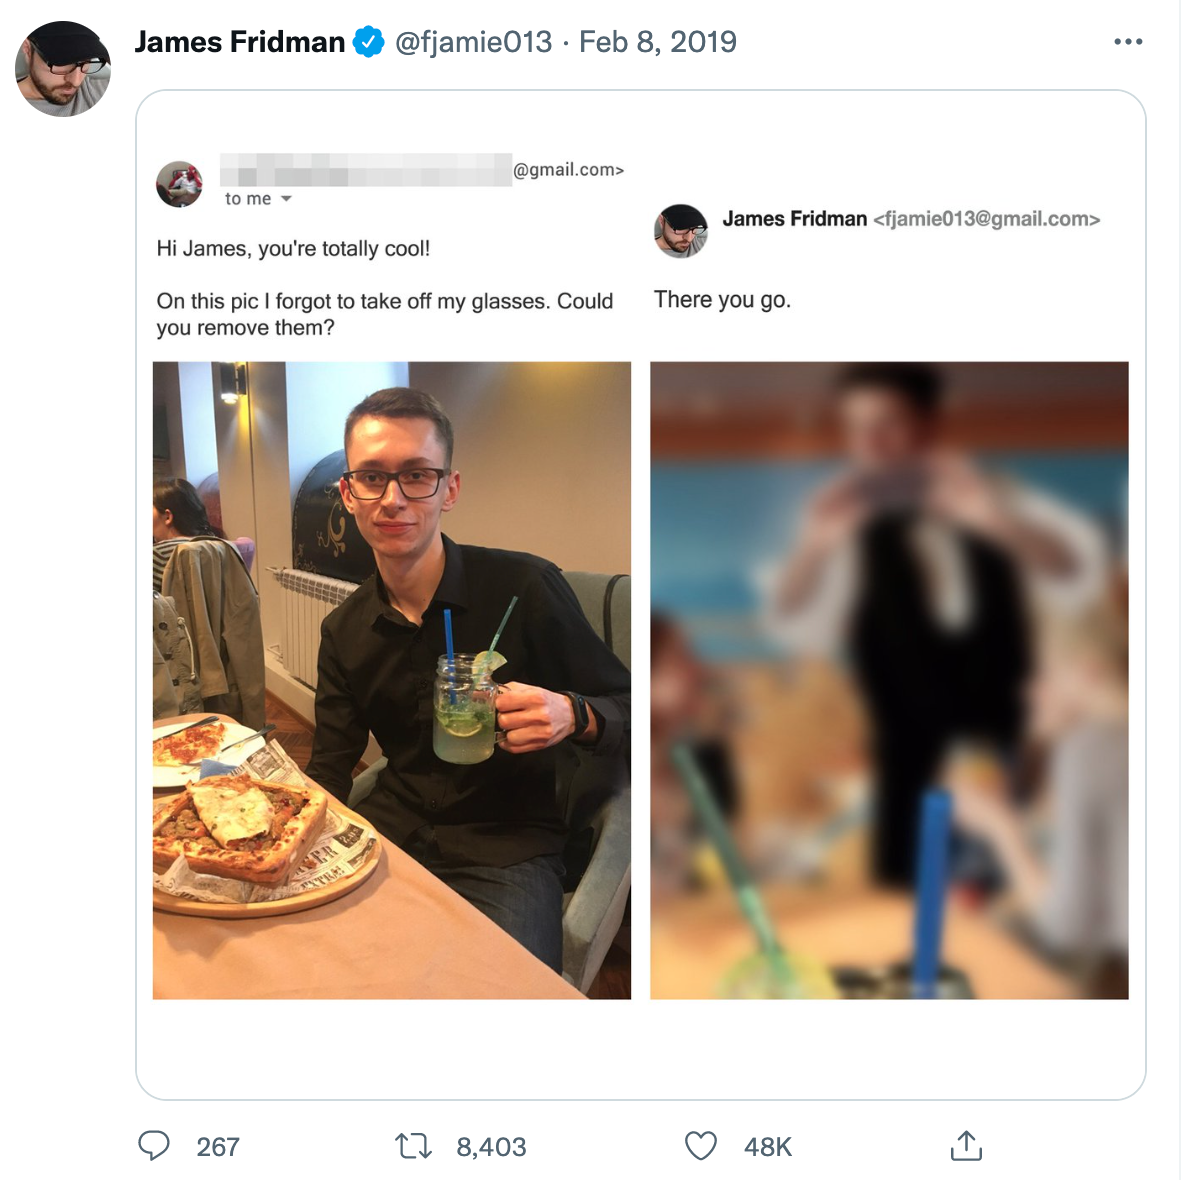 wholesome photoshop edits - james fridman glasses - James Fridman to me Hi James, you're totally cool! 267 .com> On this pic I forgot to take off my glasses. Could you remove them? 18,403 James Fridman  There you go. 48K ...